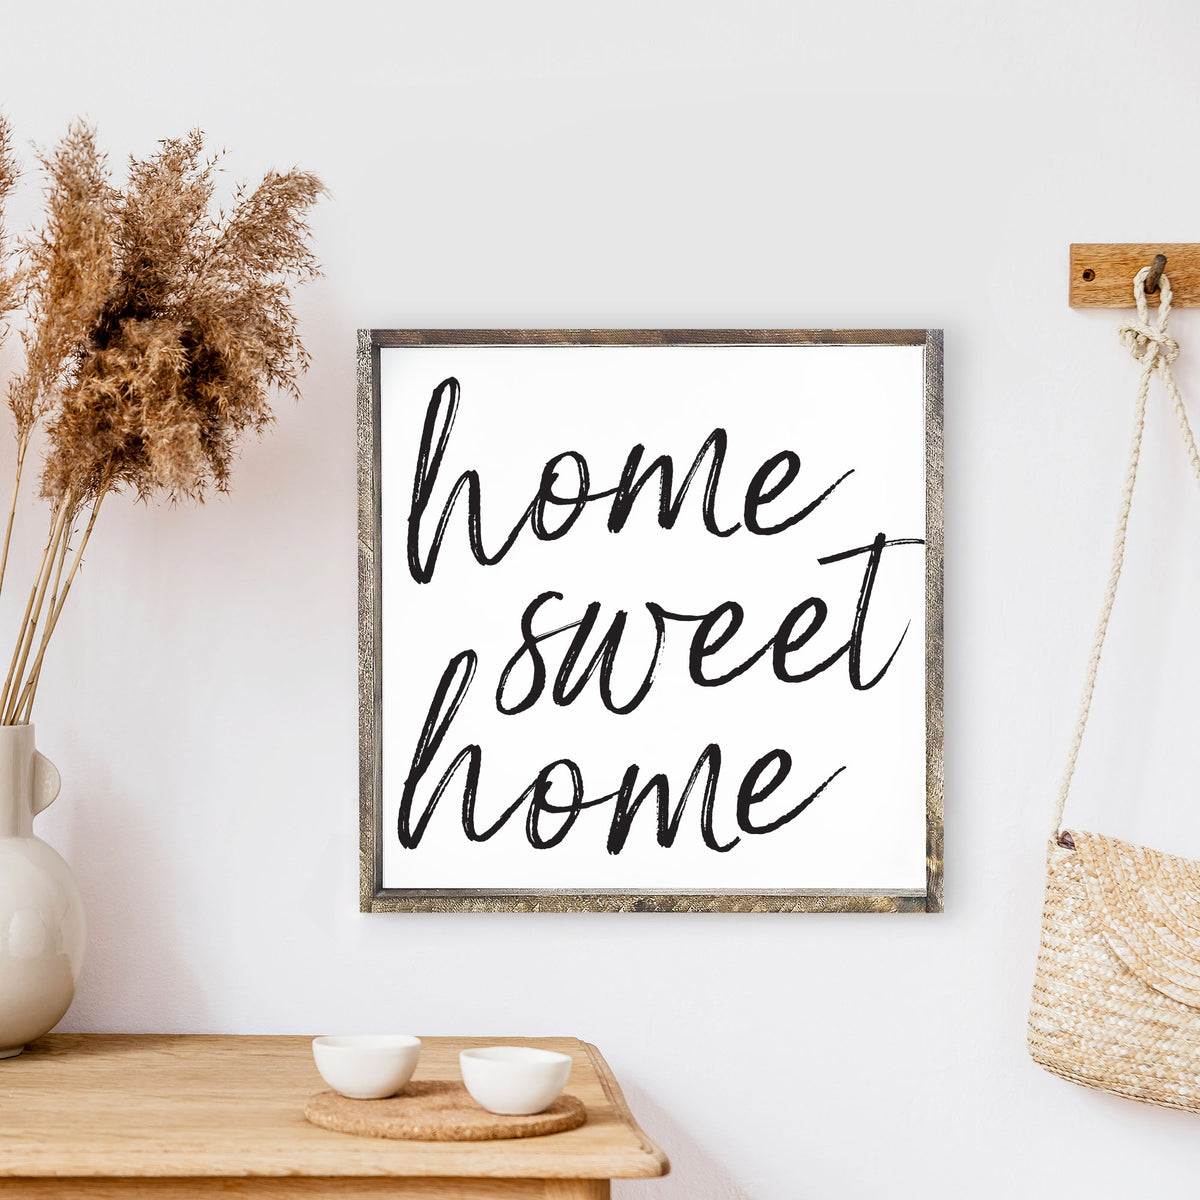 Home Sweet Home Wood Sign